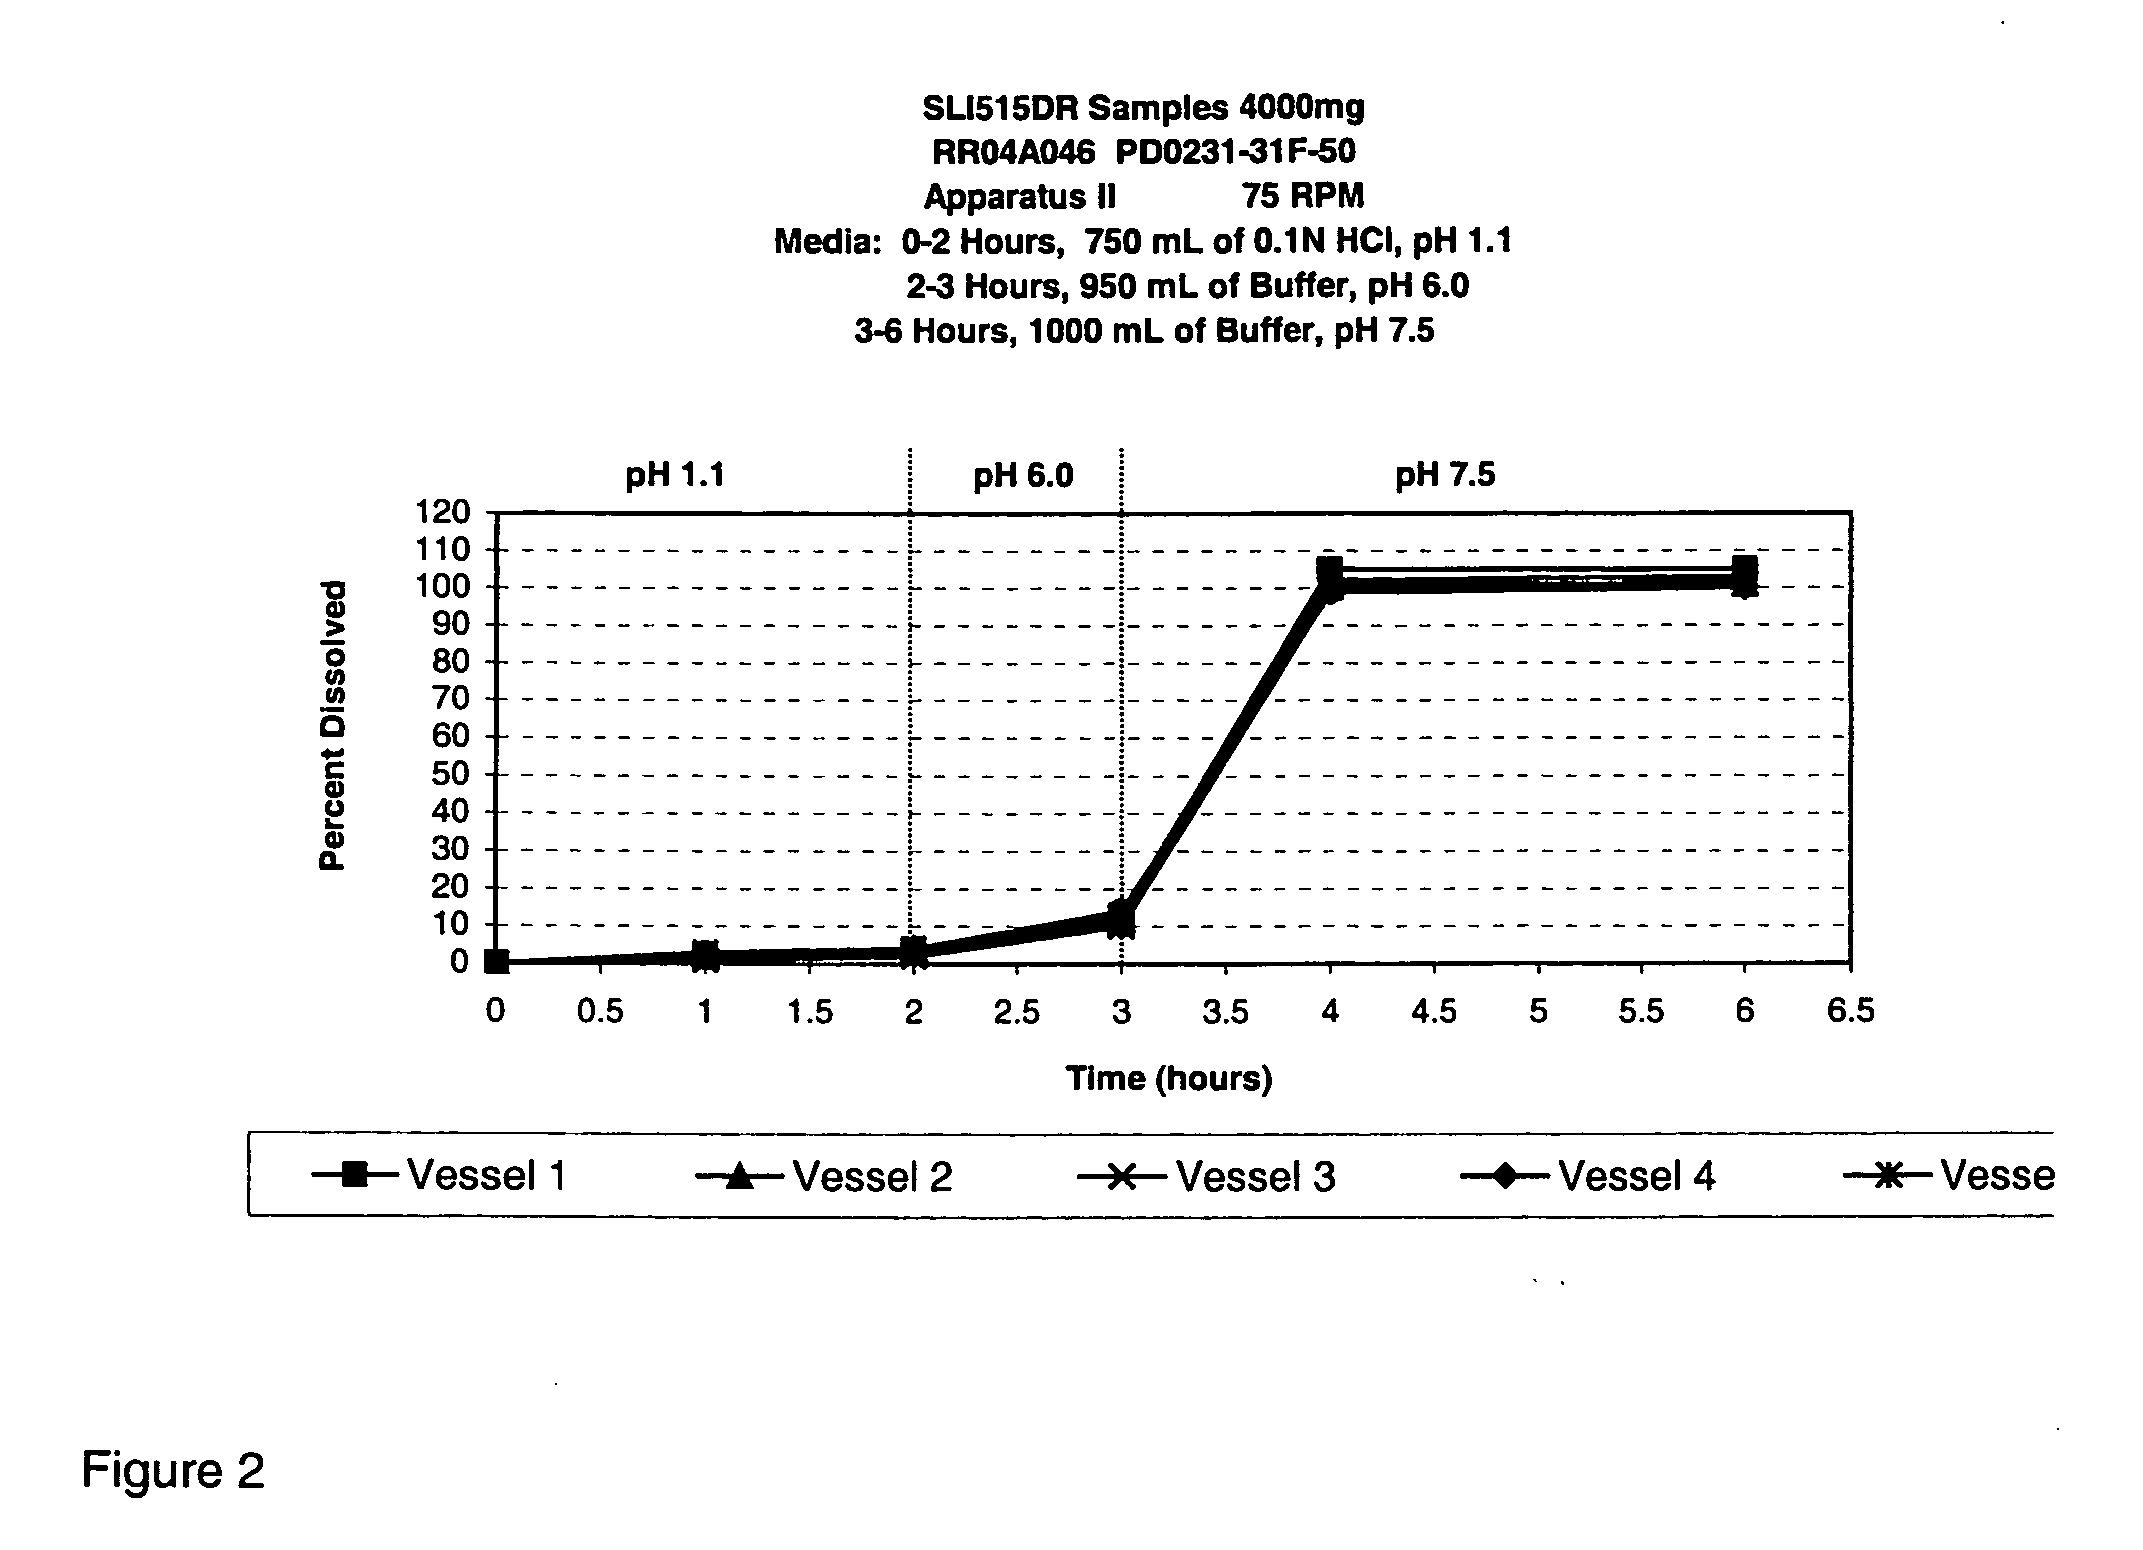 Controlled release compositions of gamma-hydroxybutyrate